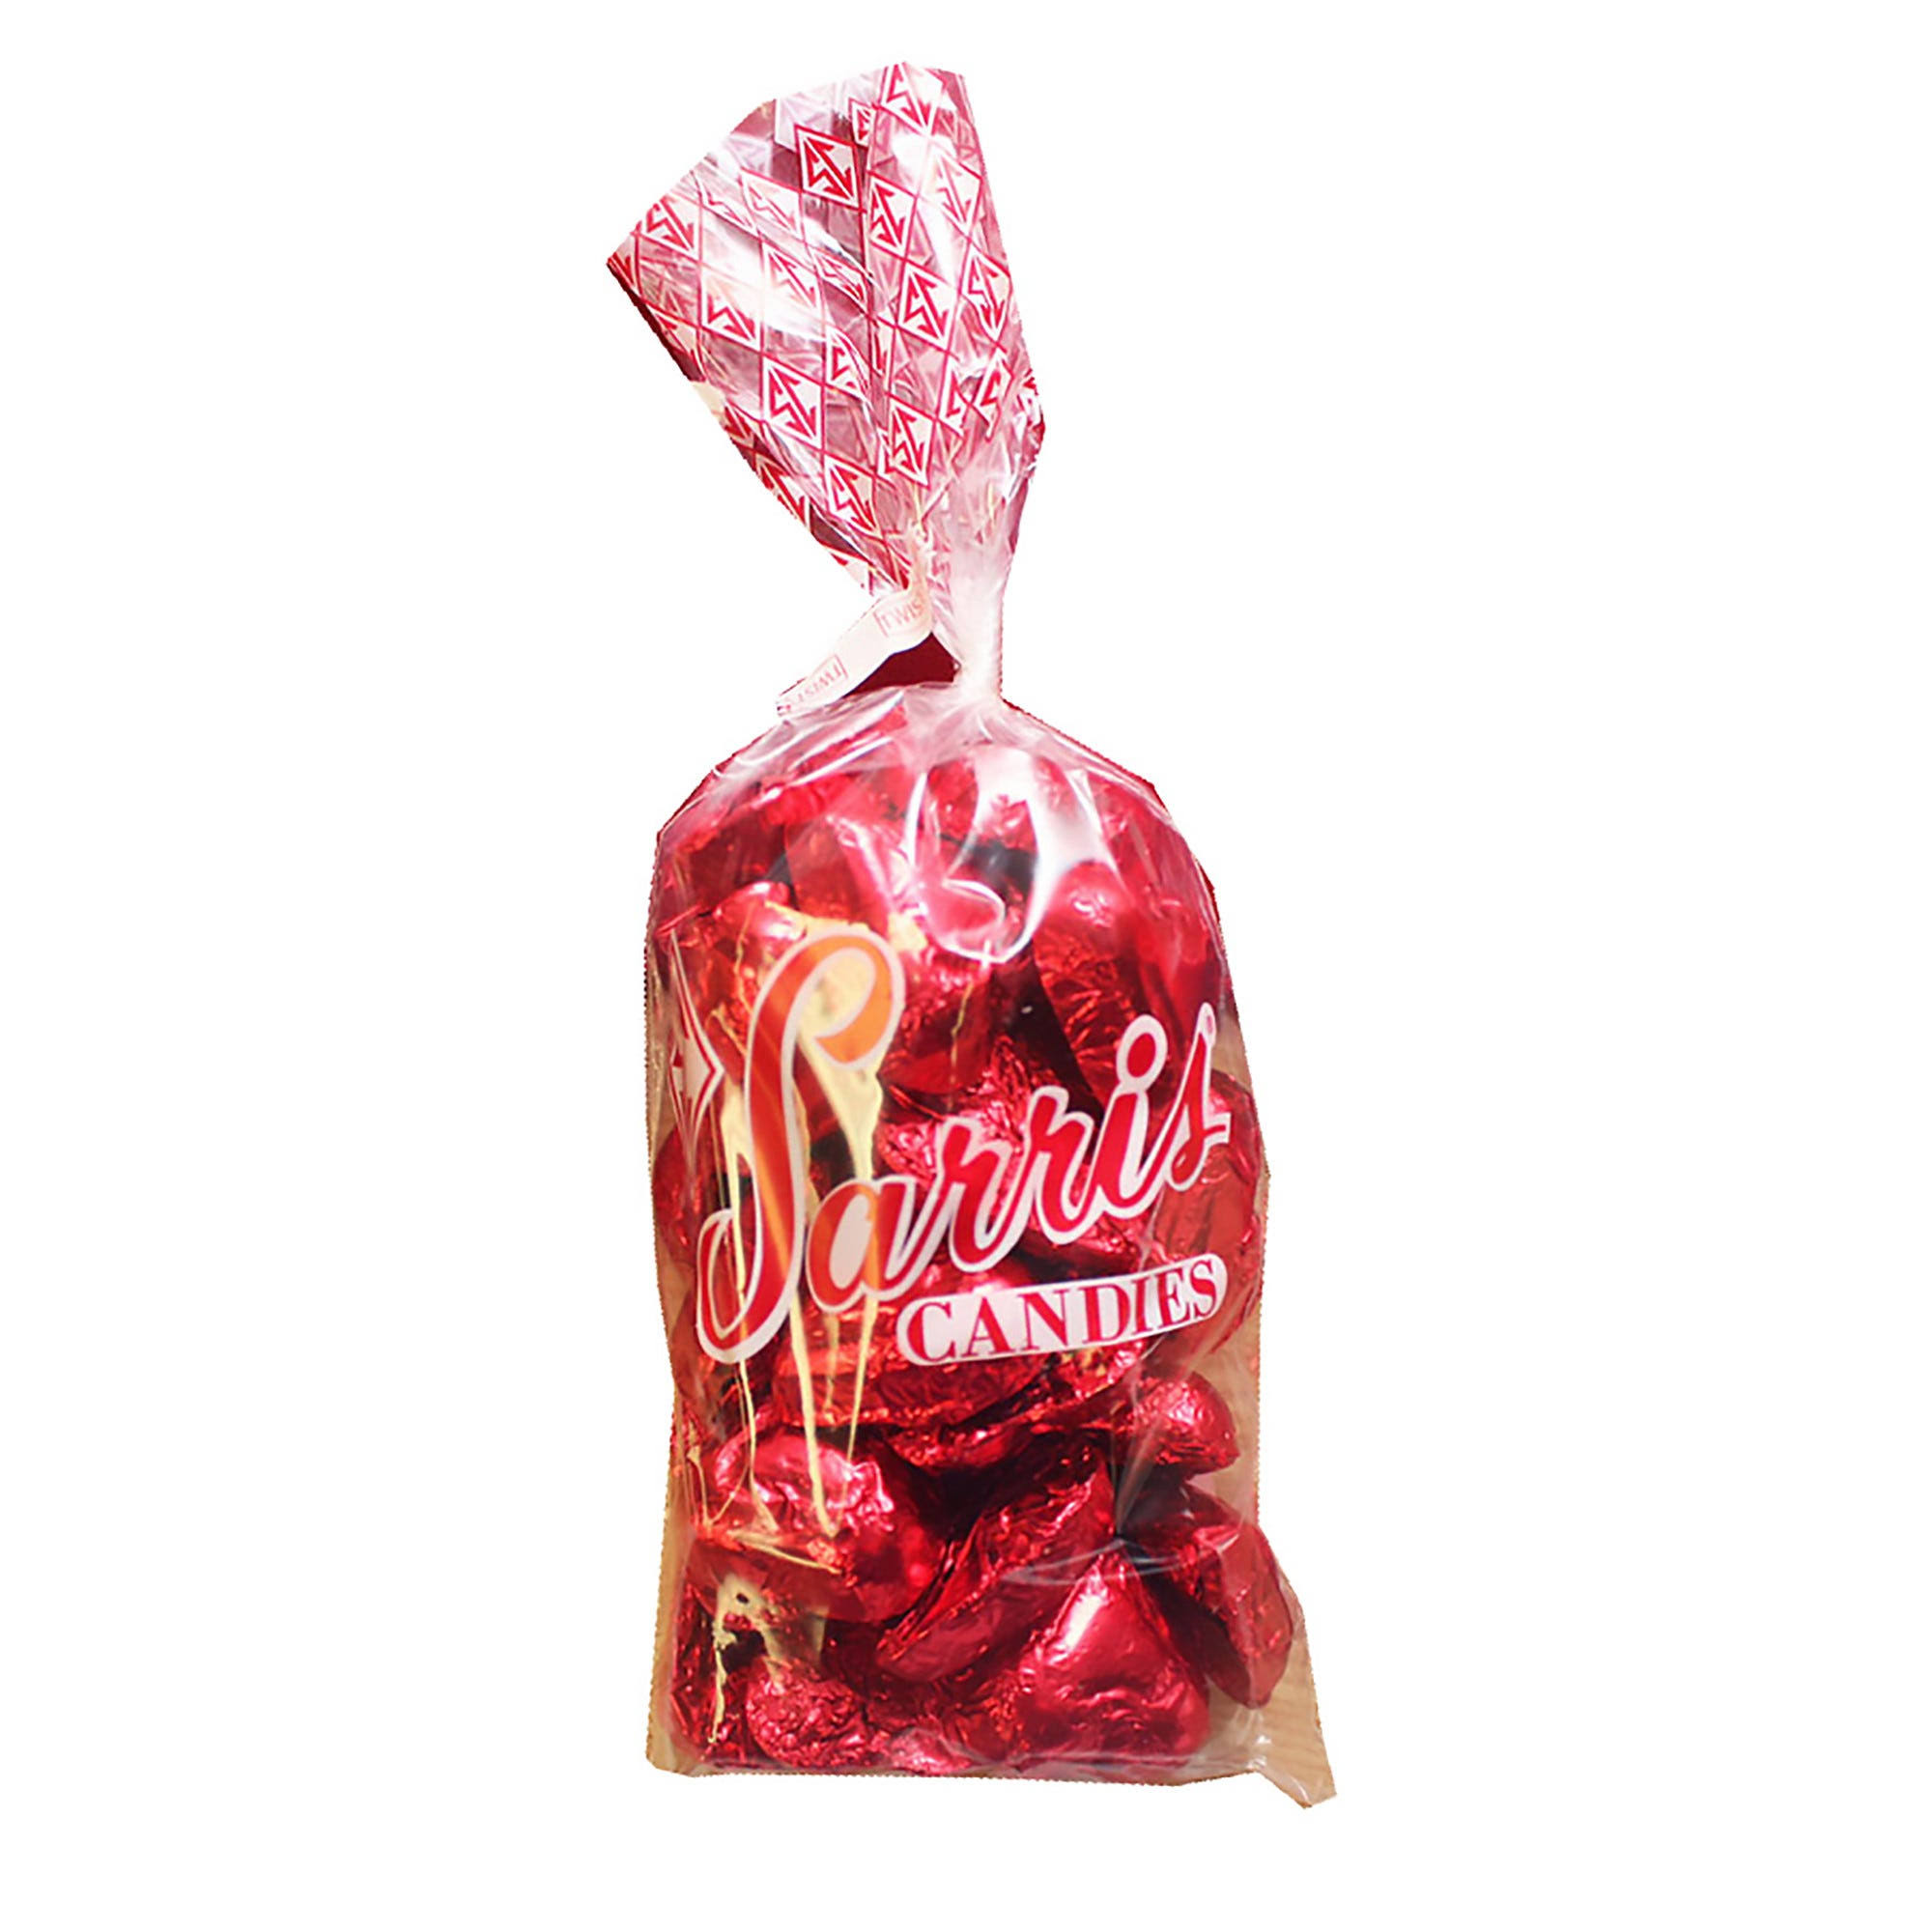 Sarris Candies Candies, Foiled Red Hearts - 8 oz